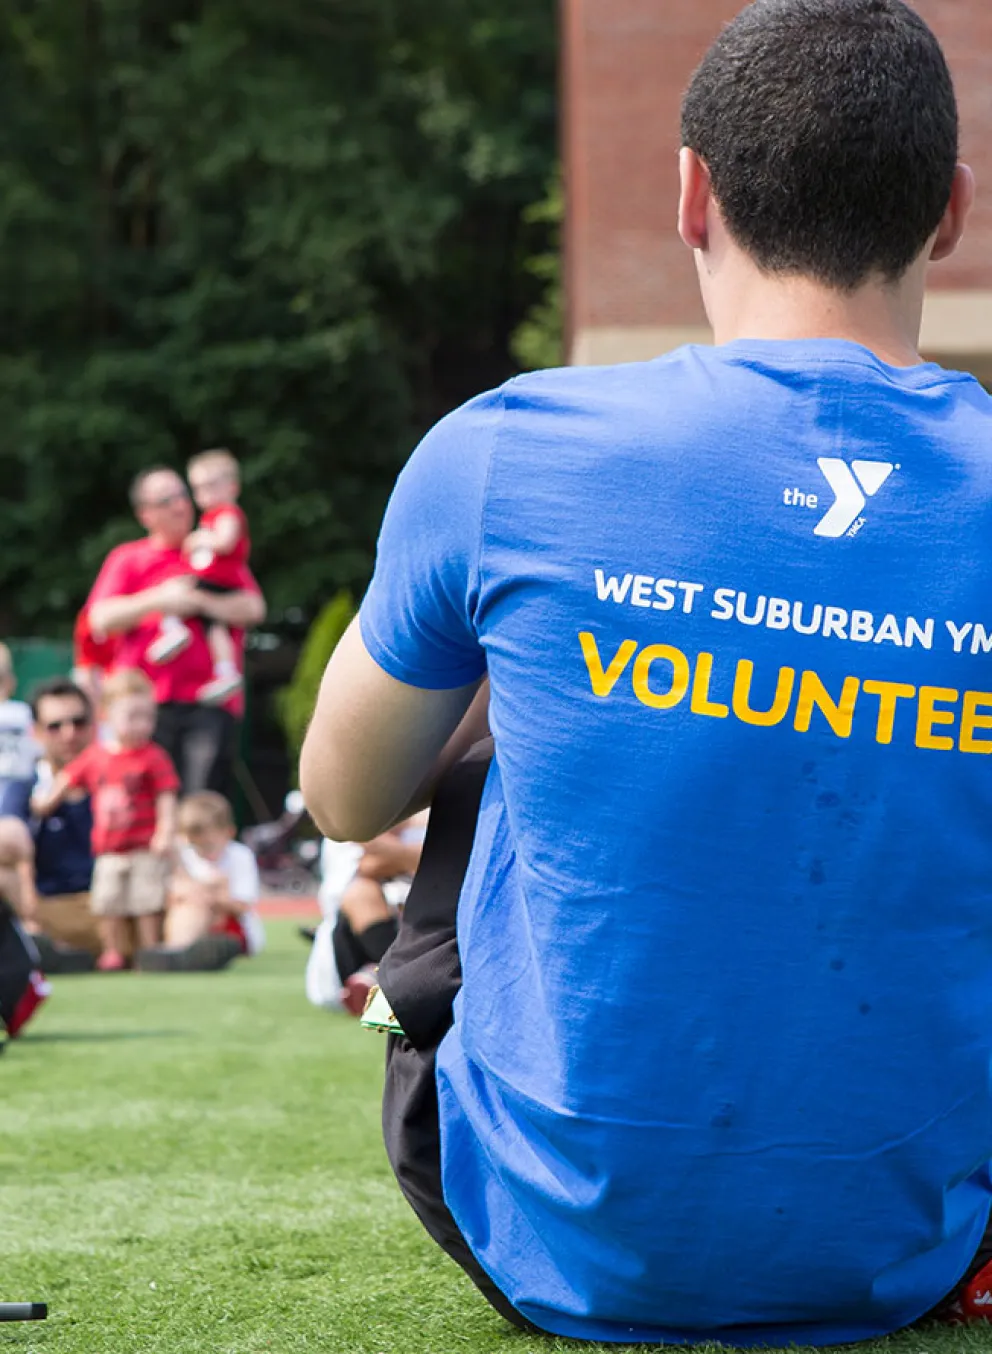 The back of a man wearing a shirts that reads "volunteer" is shown in the foreground while children sit in the background